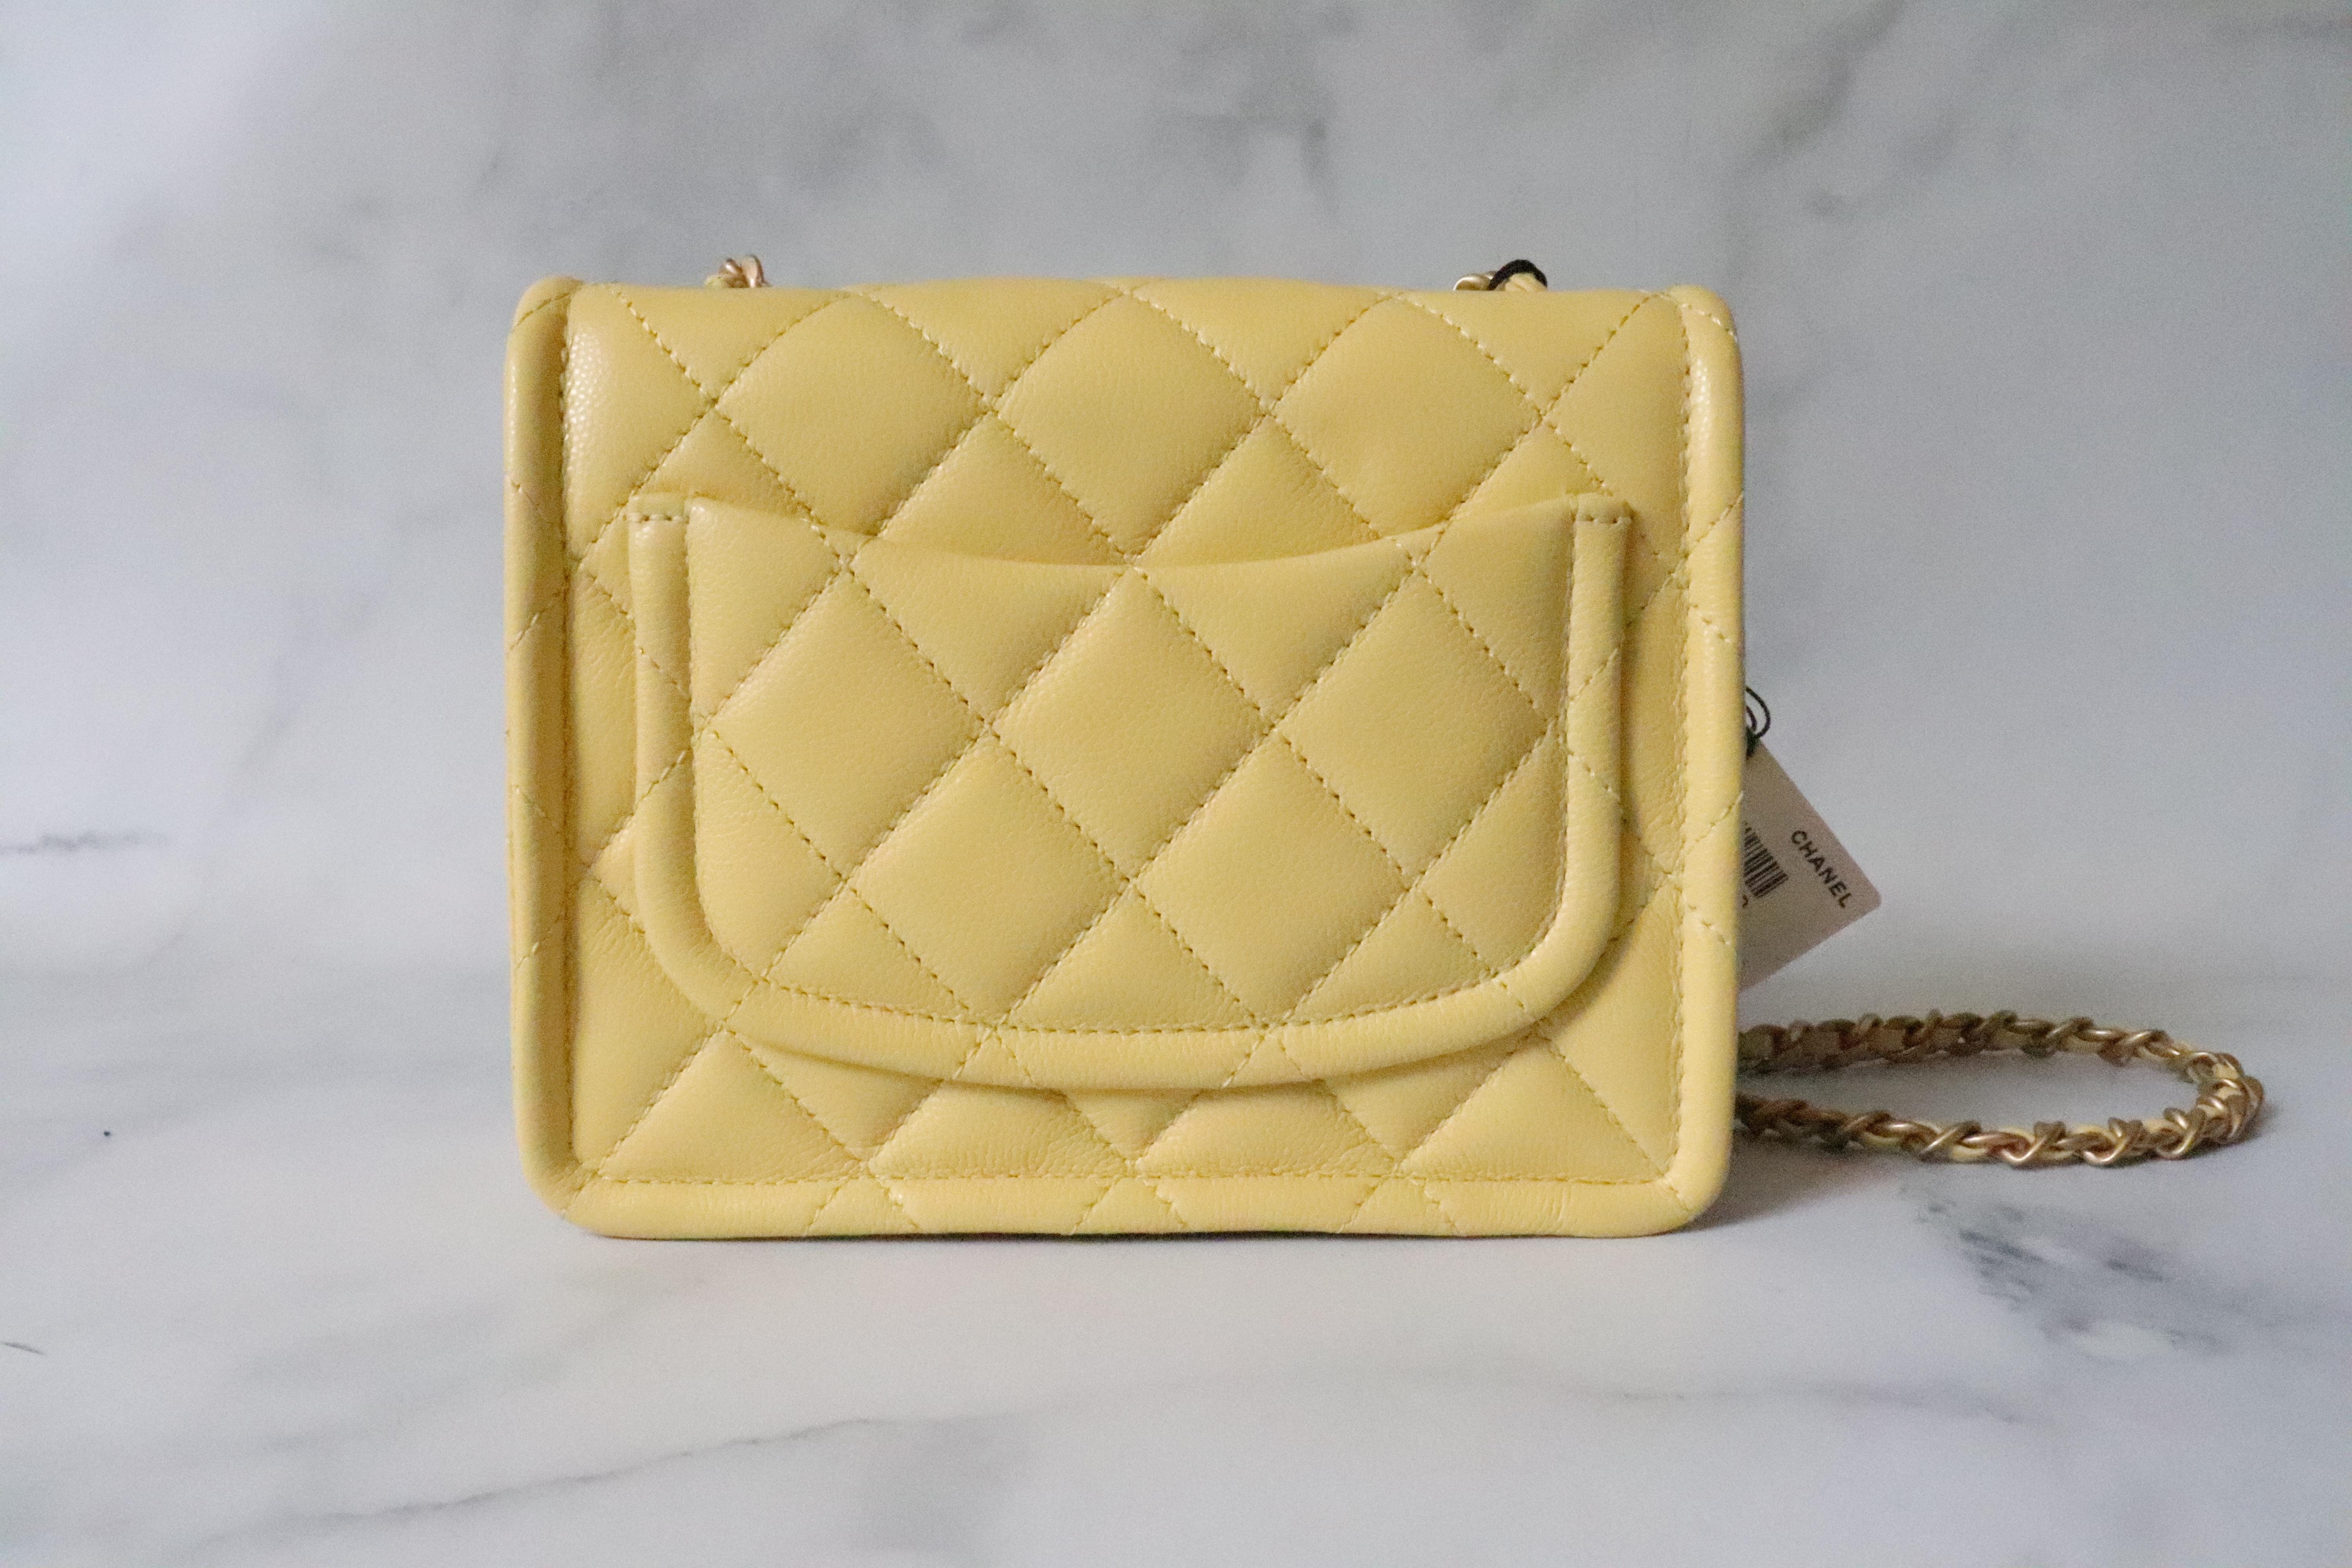 Caviar Seasonal Quilted Mini Sweet Classic Flap, Yellow Caviar Leather,  Brushed Gold Hardware, New in Box